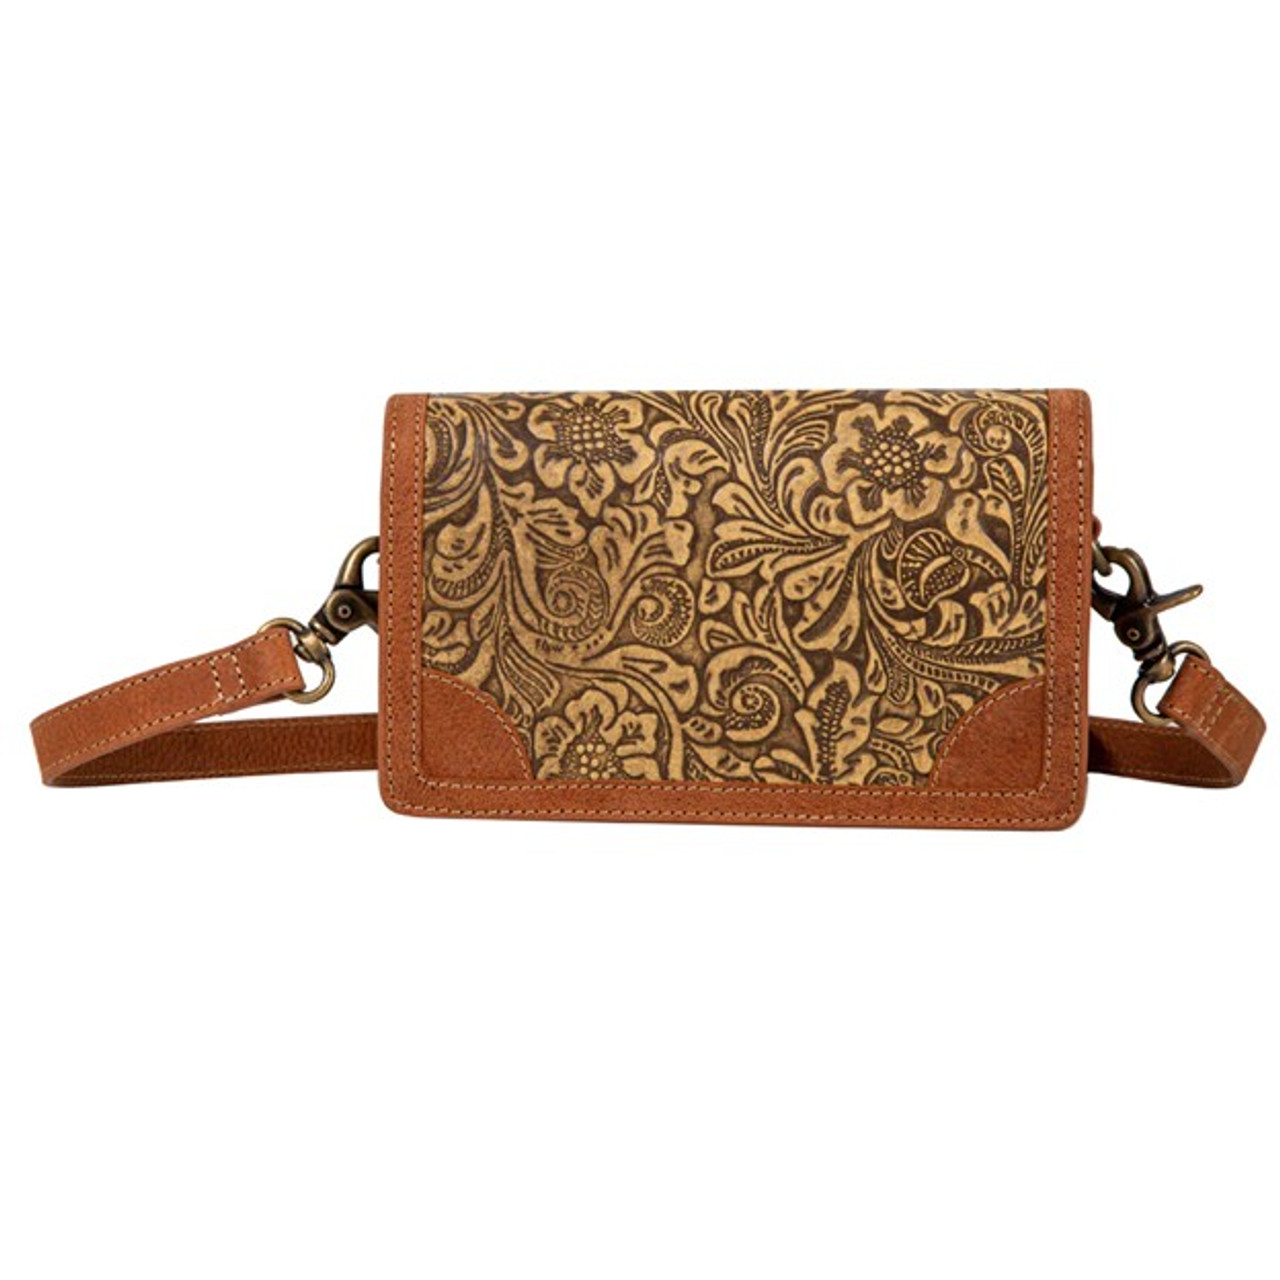 CLASSIC COUNTRY LEATHER HAIRON BAG